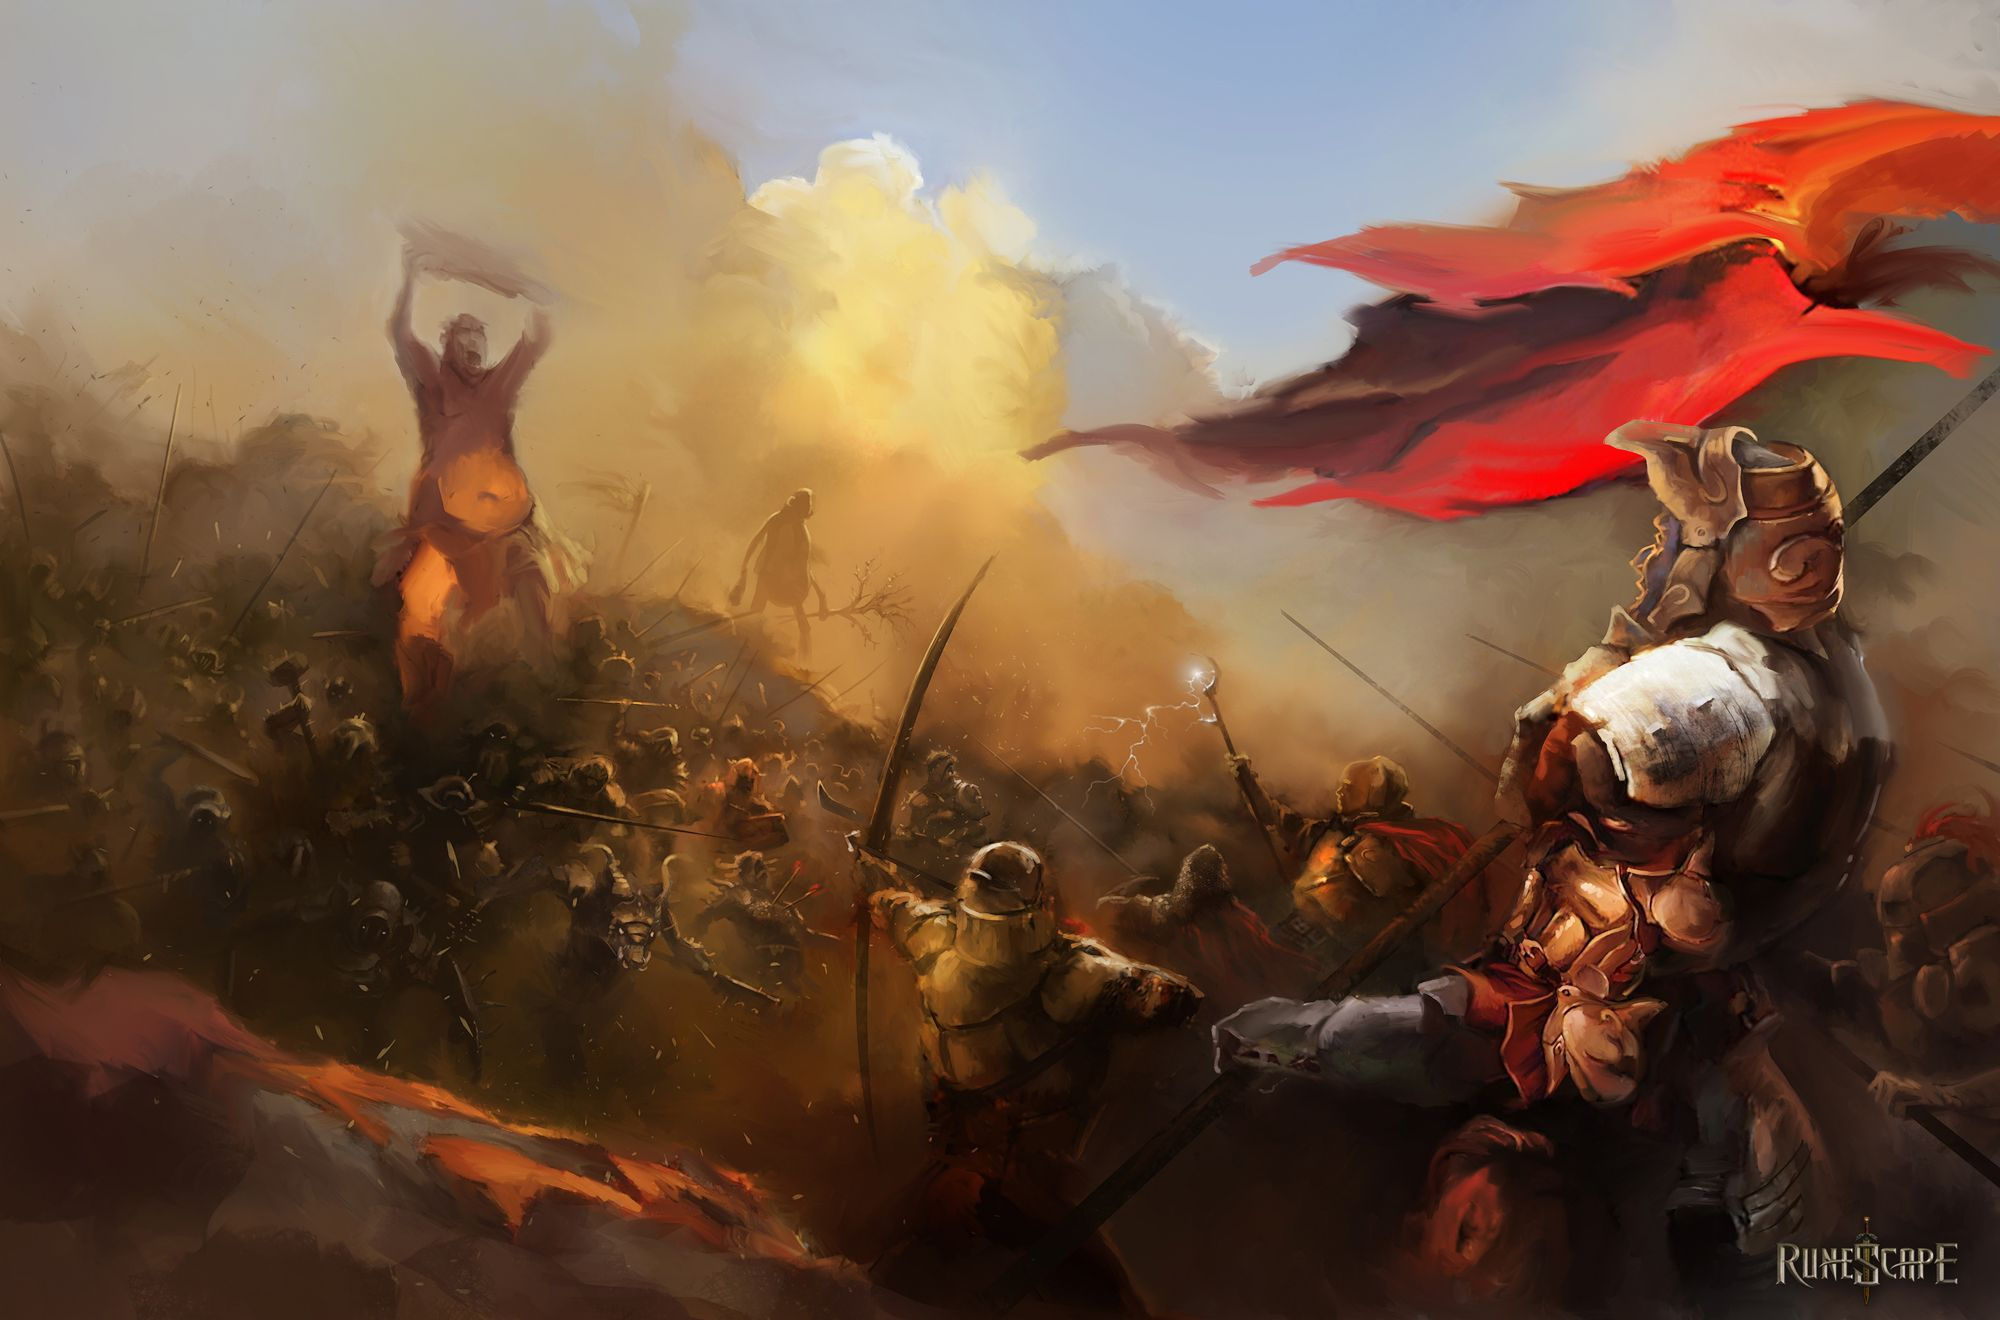 2000x1320 One of the Loading Screens I made for Runescape | Runescape wallpaper, Illustration art, Art